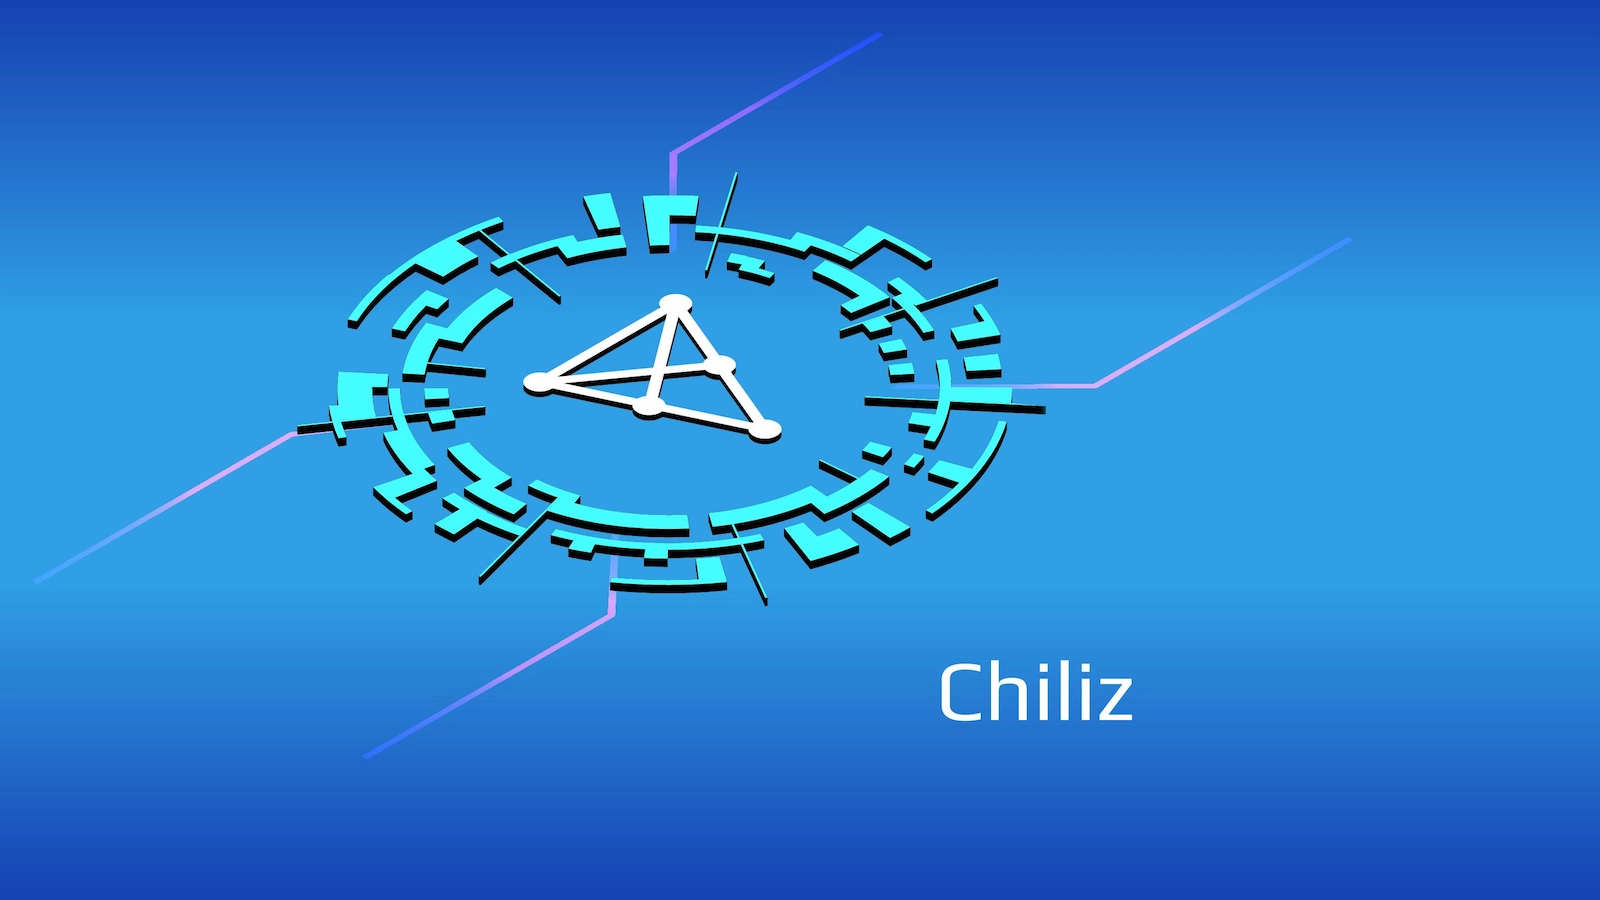 Chiliz price has recovered slightly, while forming a bullish technical pattern